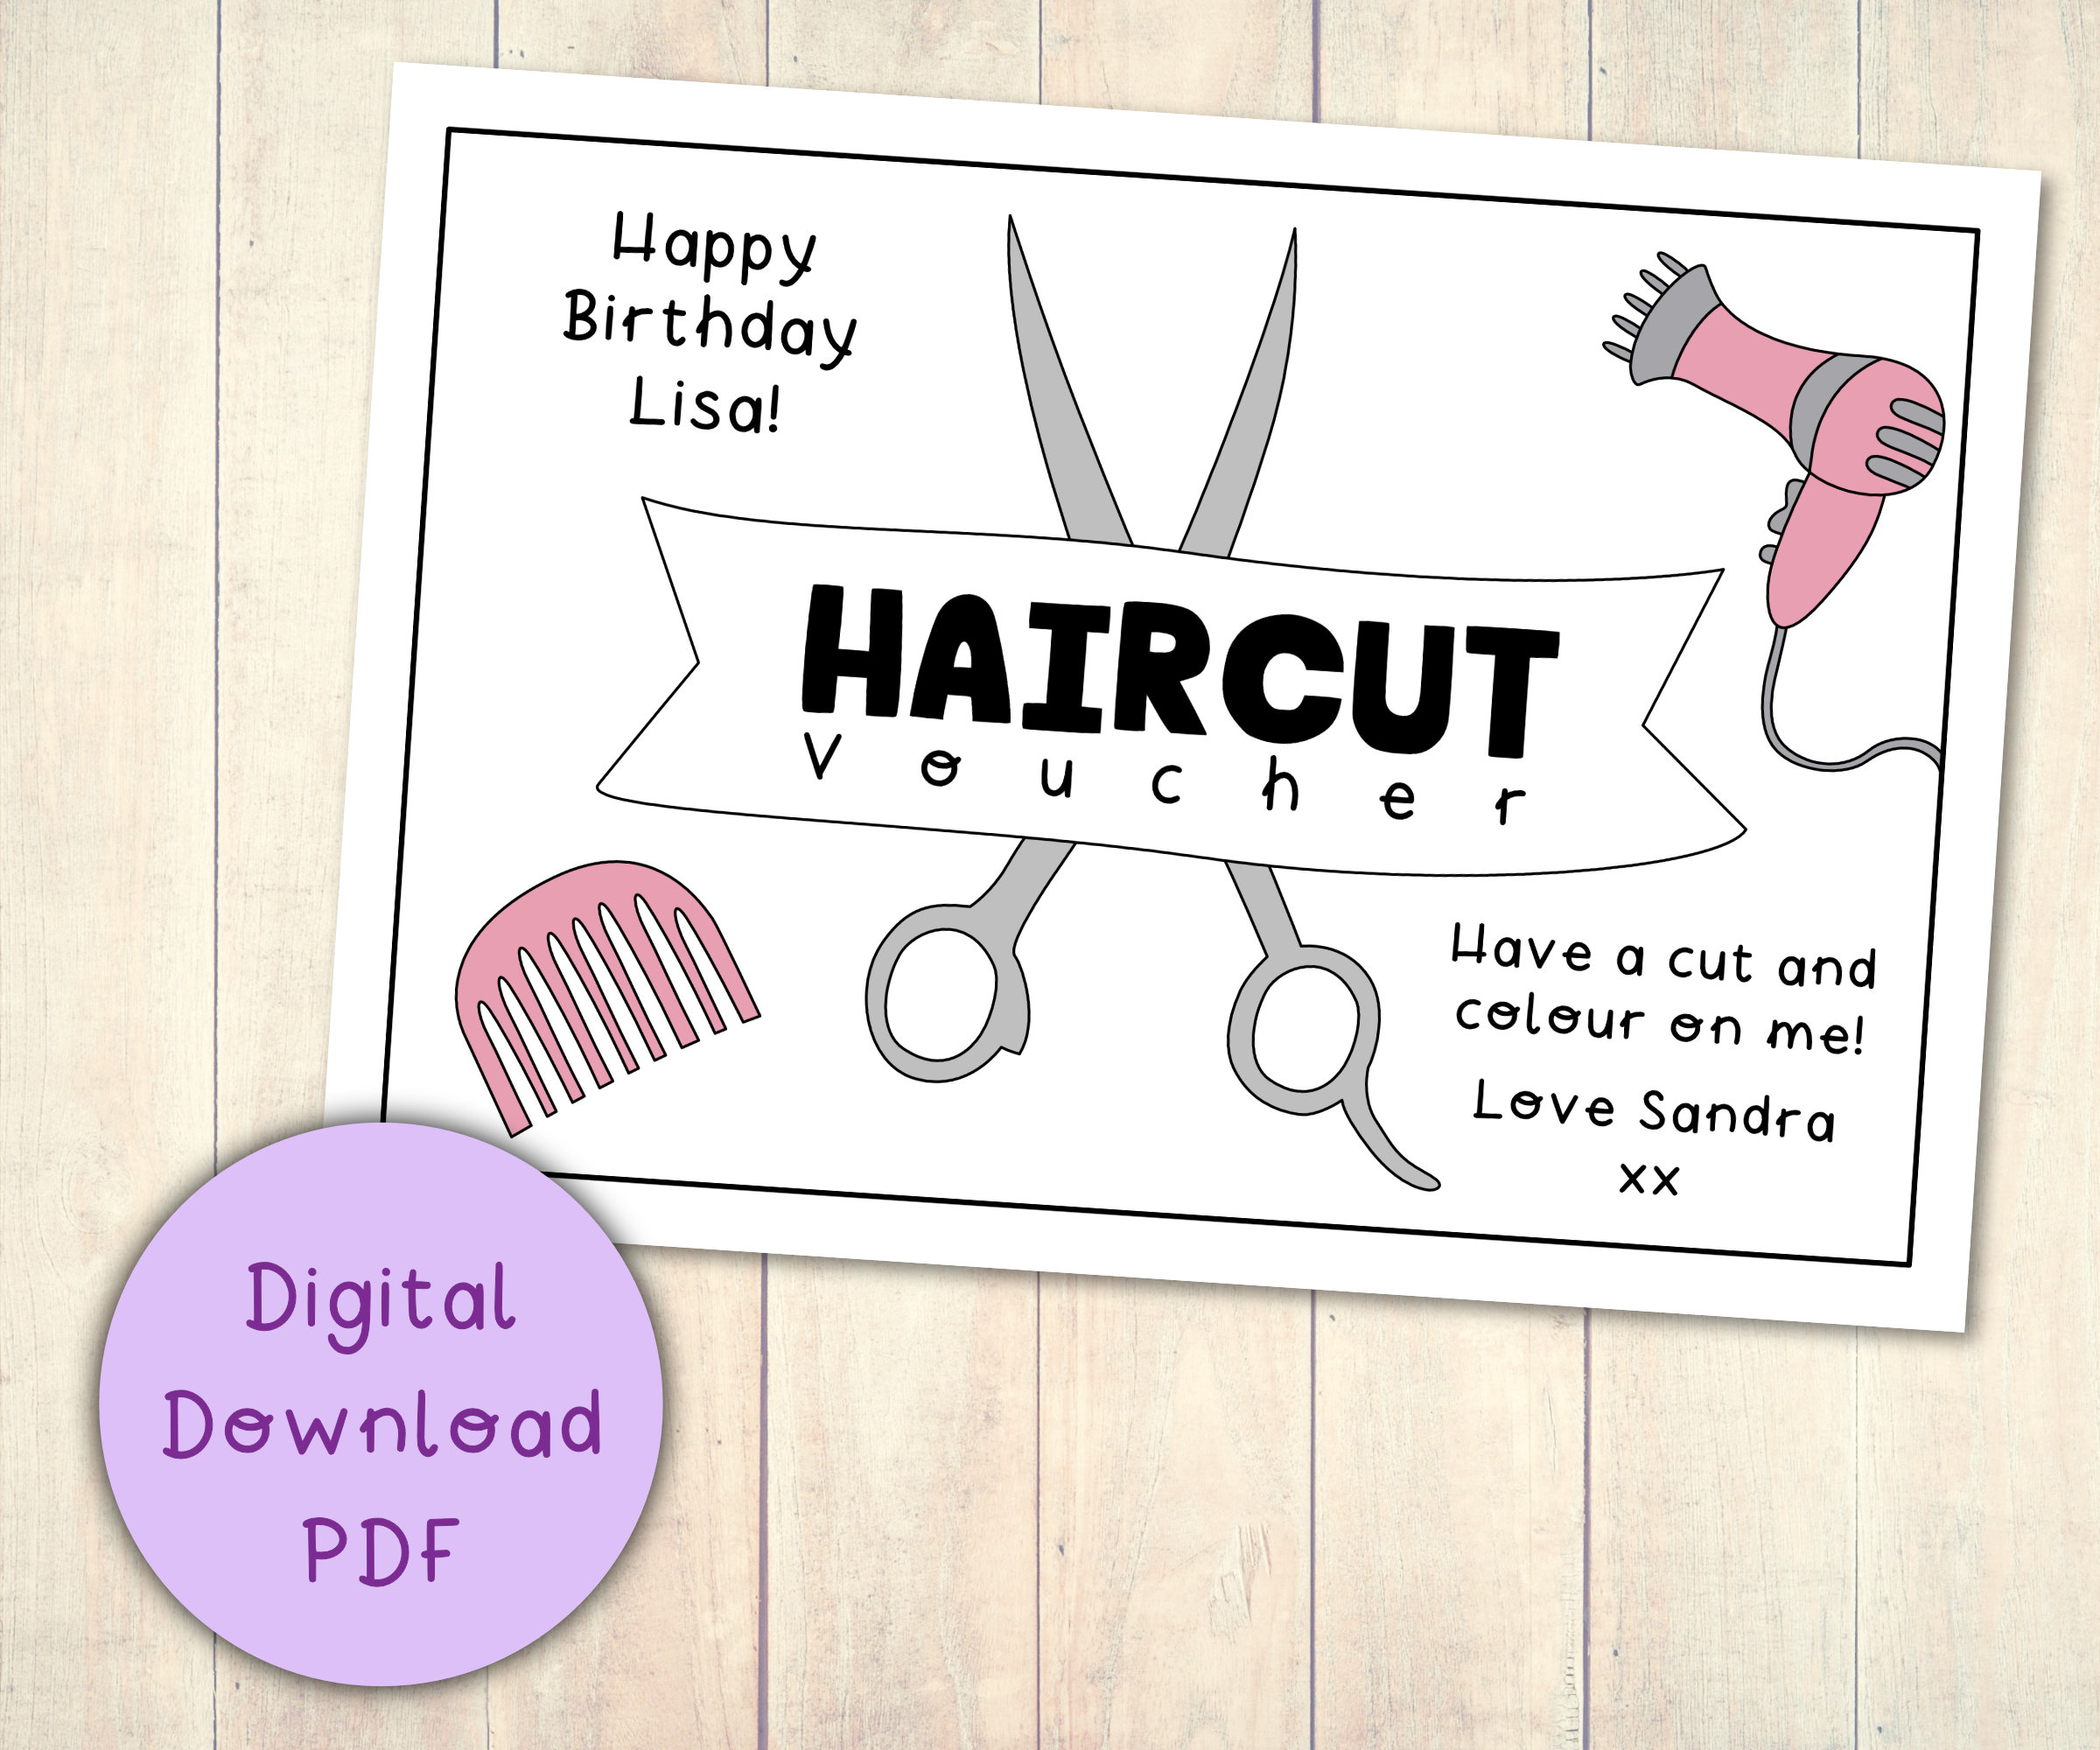 Haircut Gift Voucher Coupon Printable Digital Download Pdf in Free Printable Hair Cuttery Coupons